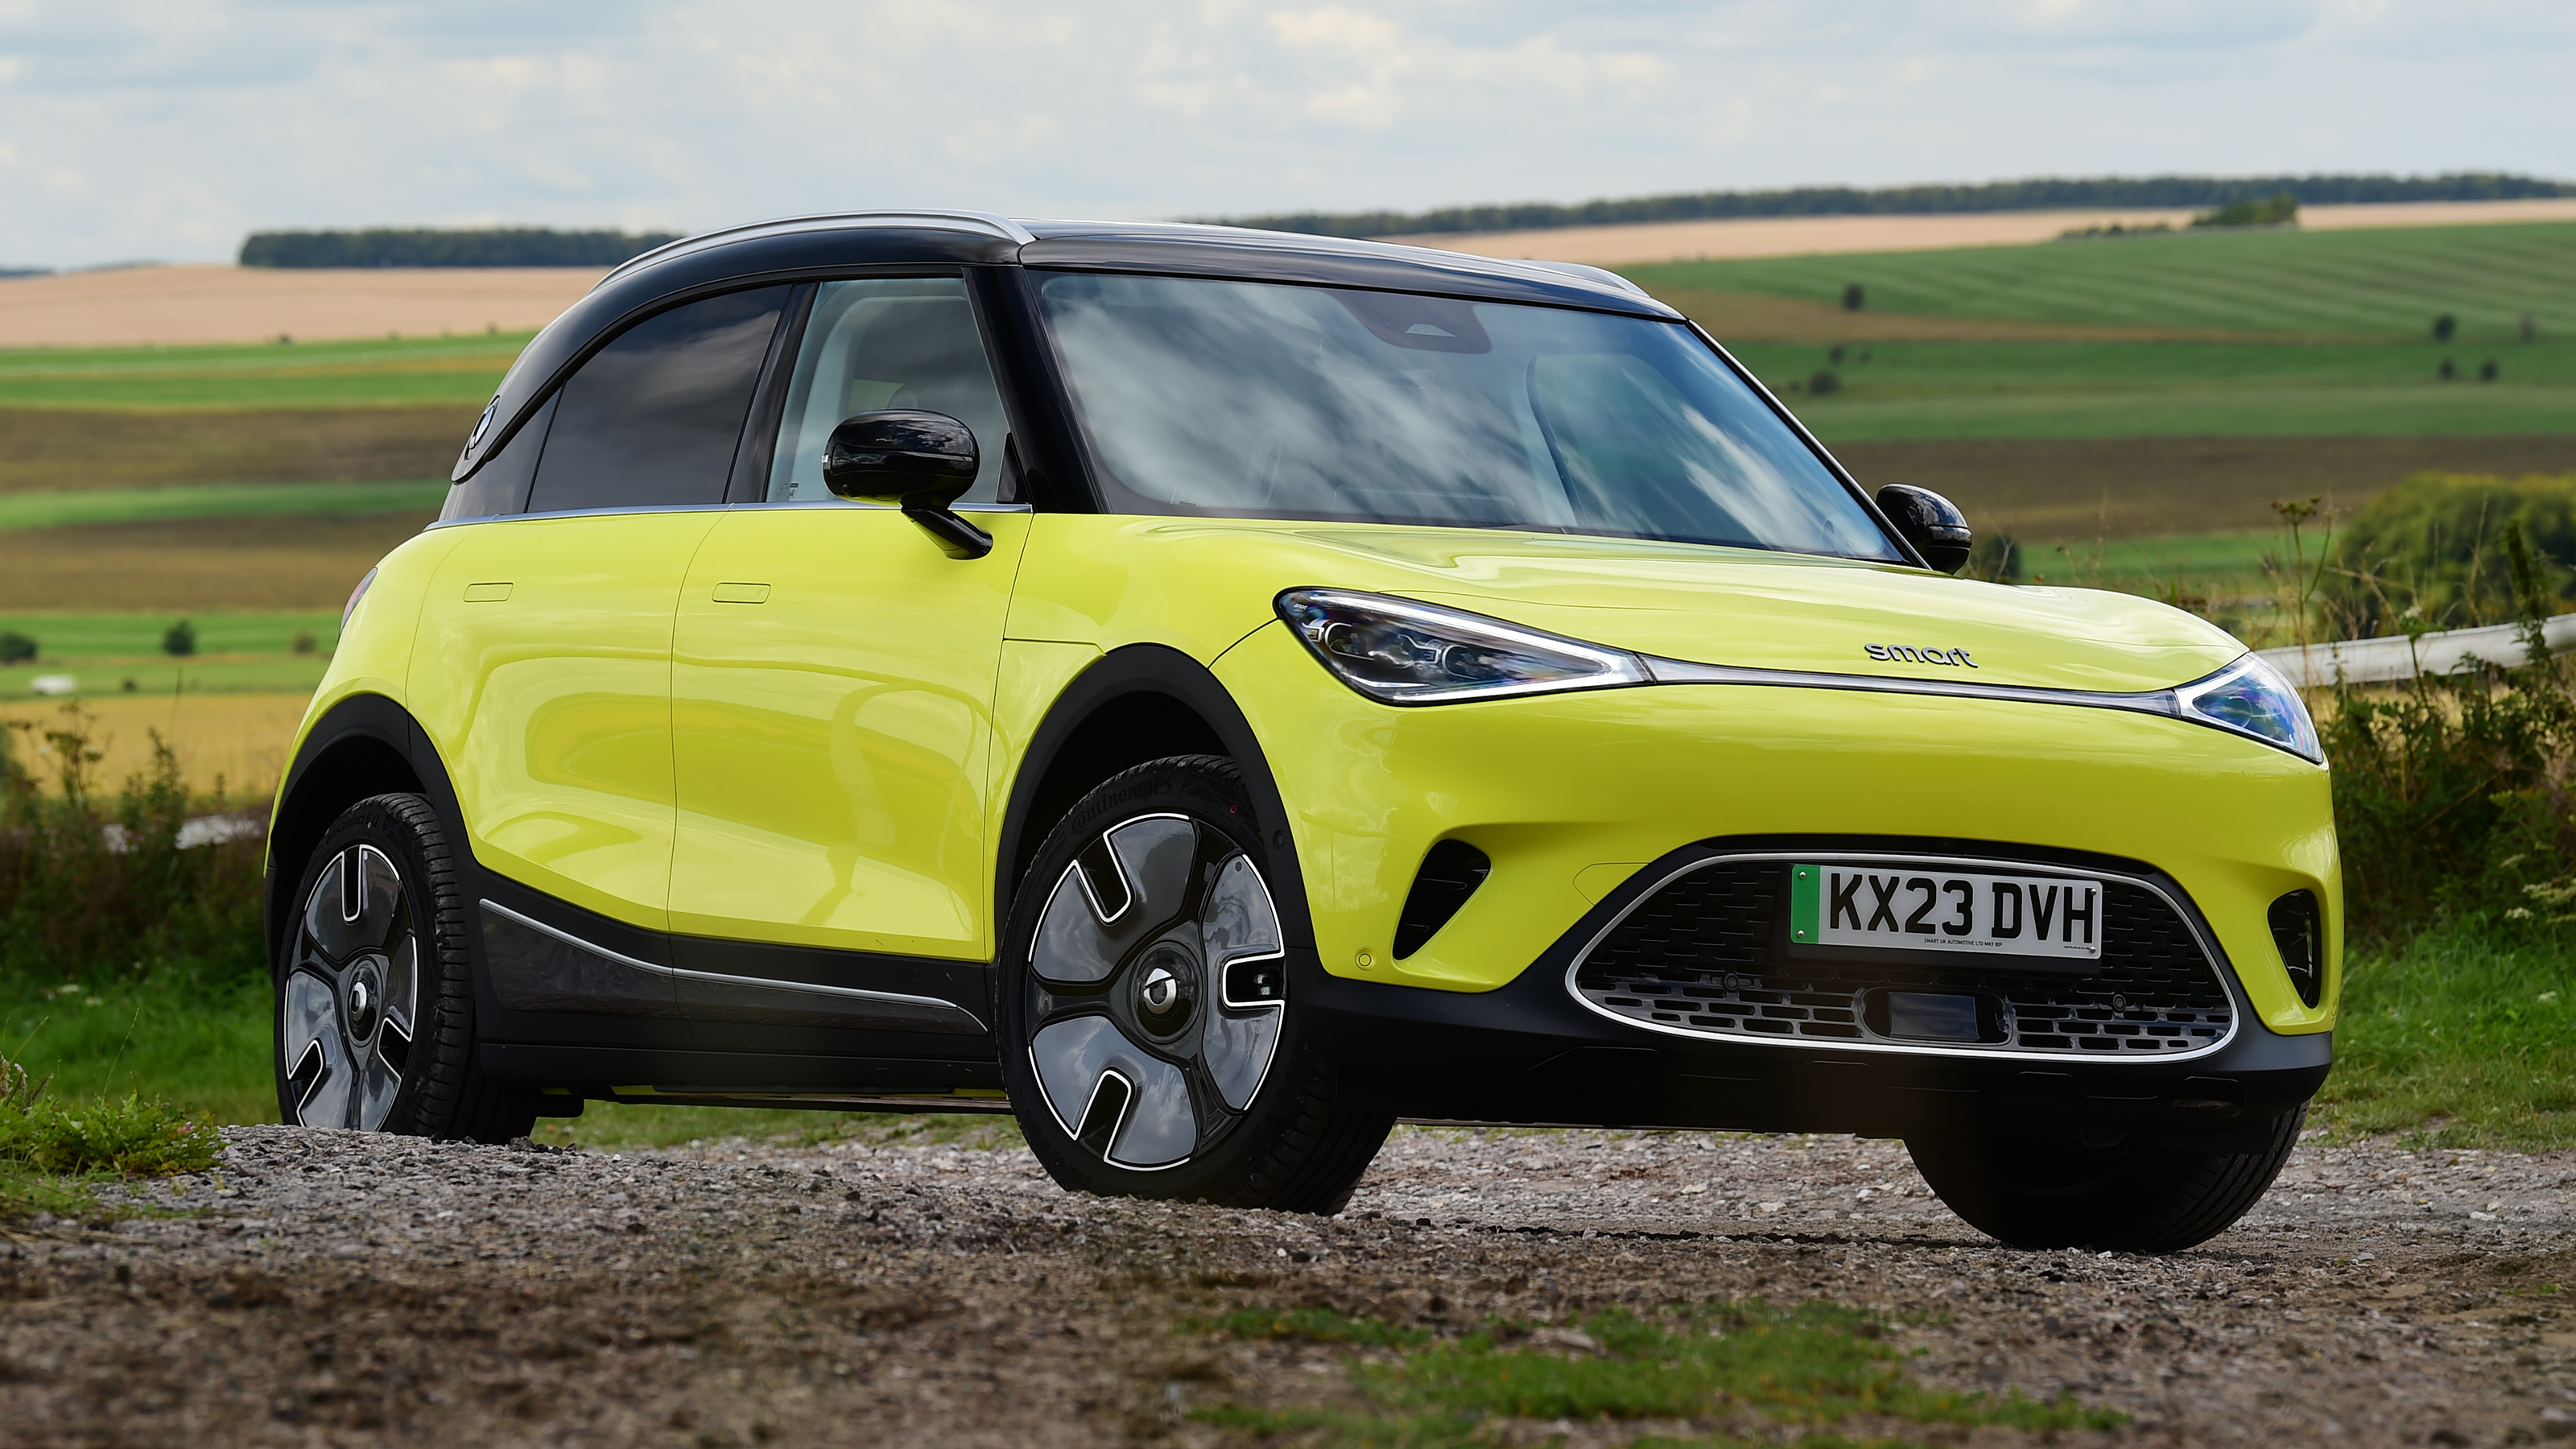 Smart #1 revealed as 1820kg electric SUV - Drive